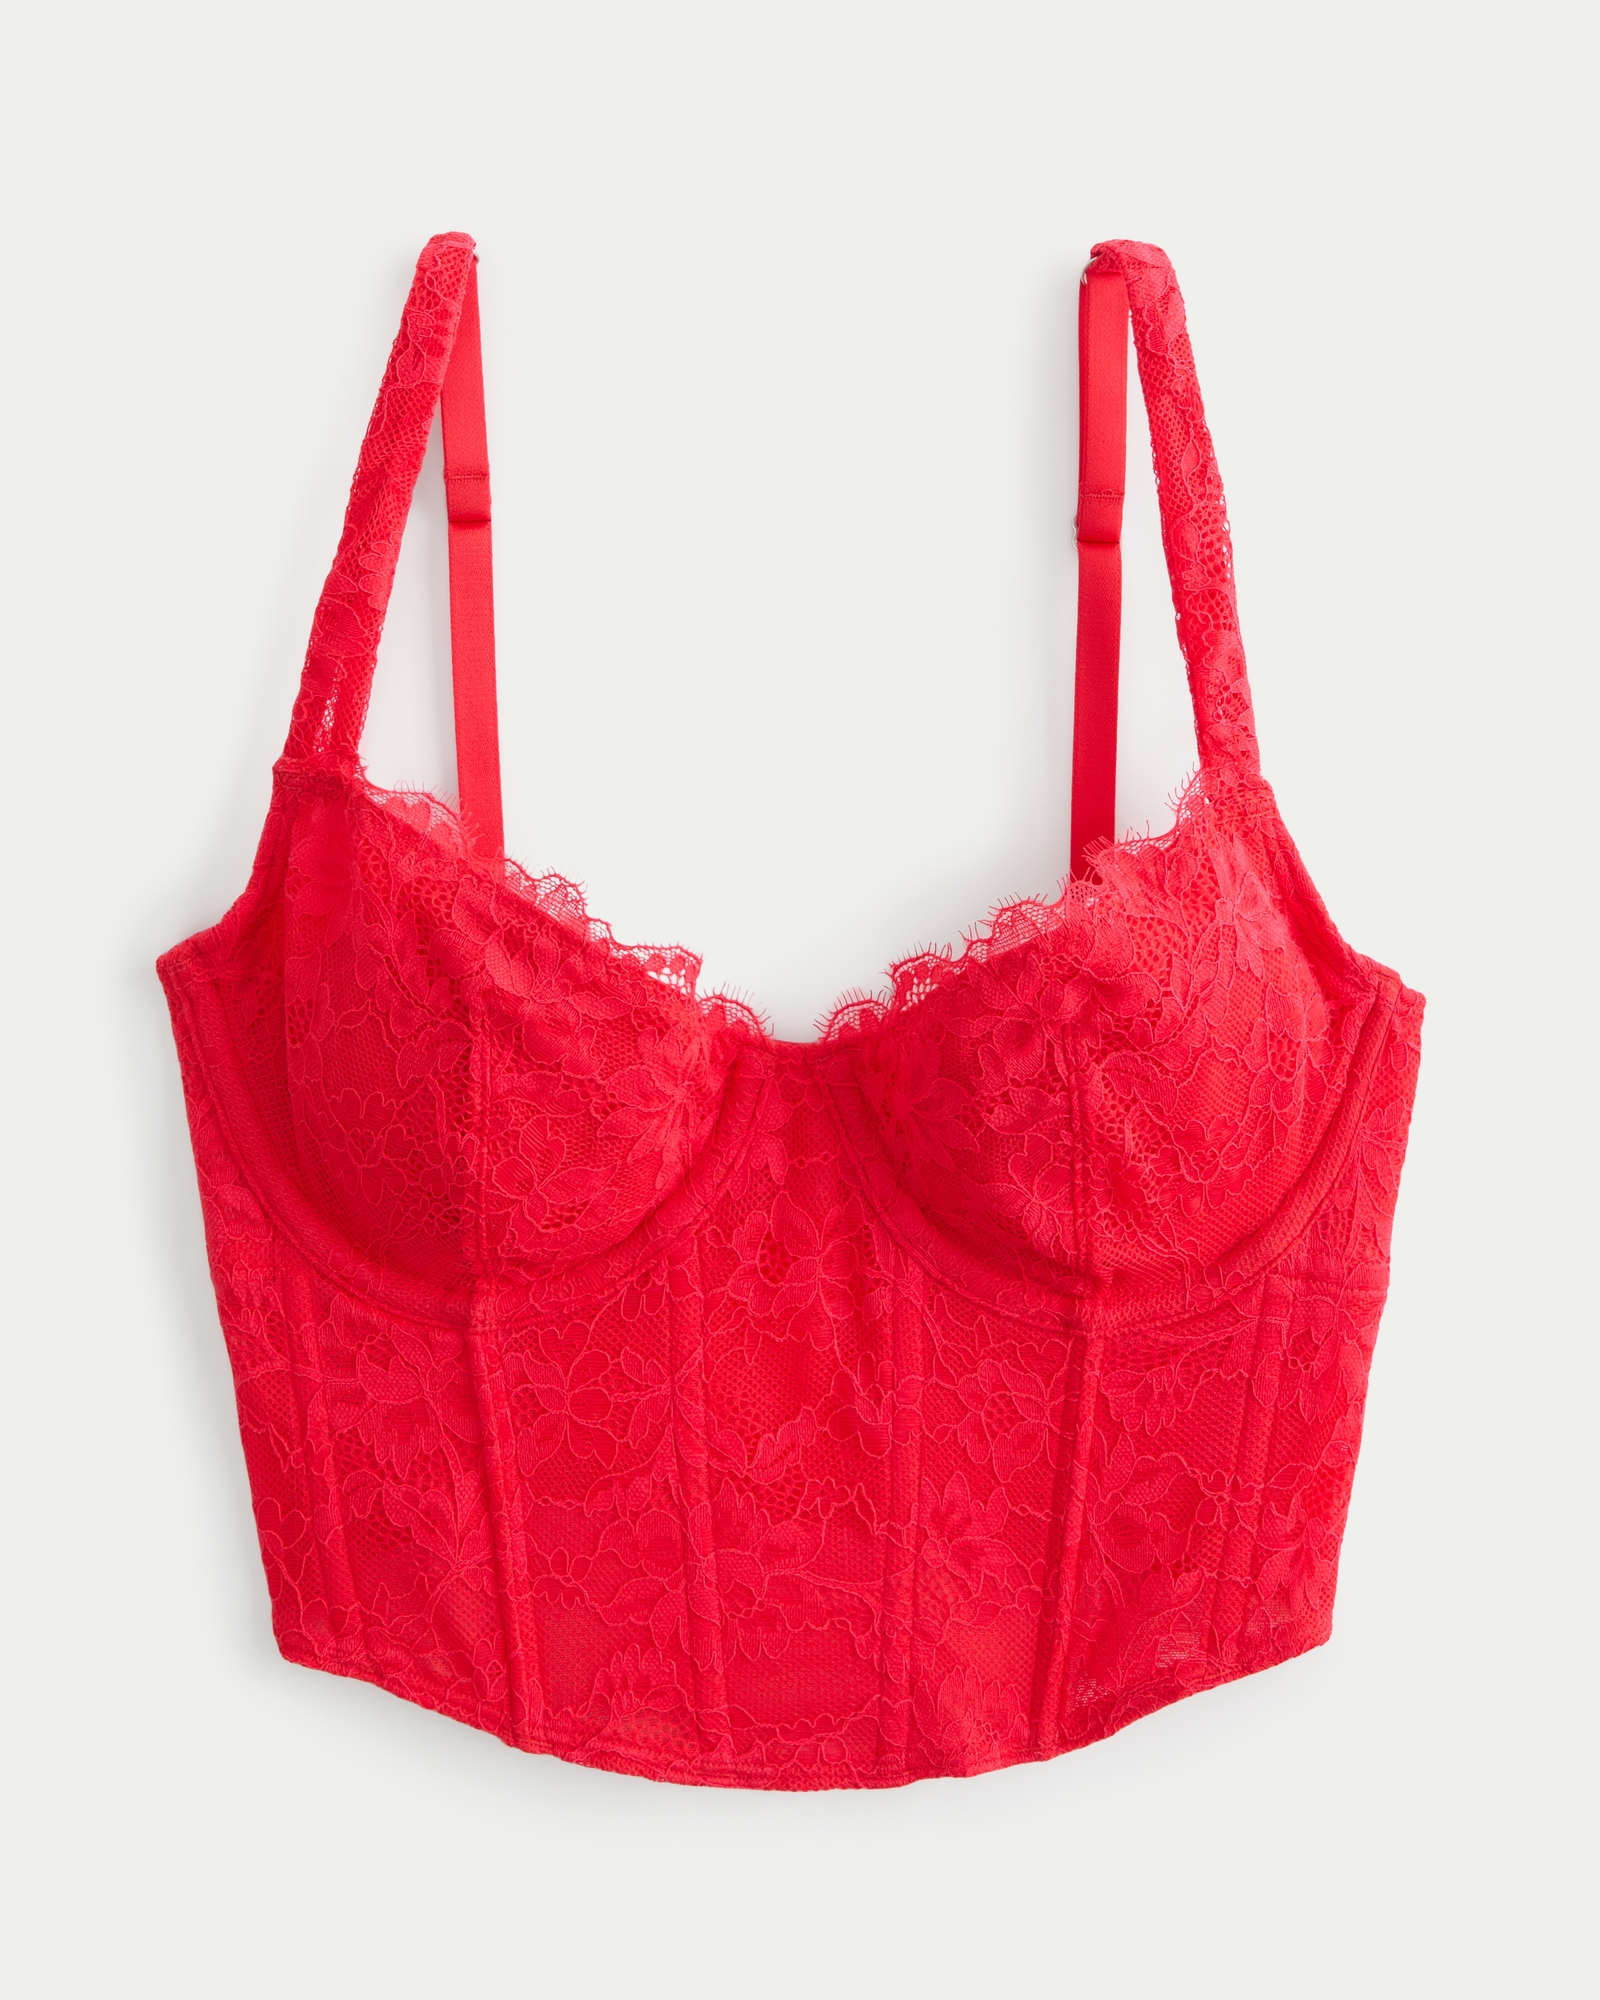 GILLY HICKS UNLINED Bralette Size XS Red Floral Wireless Cotton Beach Bra  $20.00 - PicClick